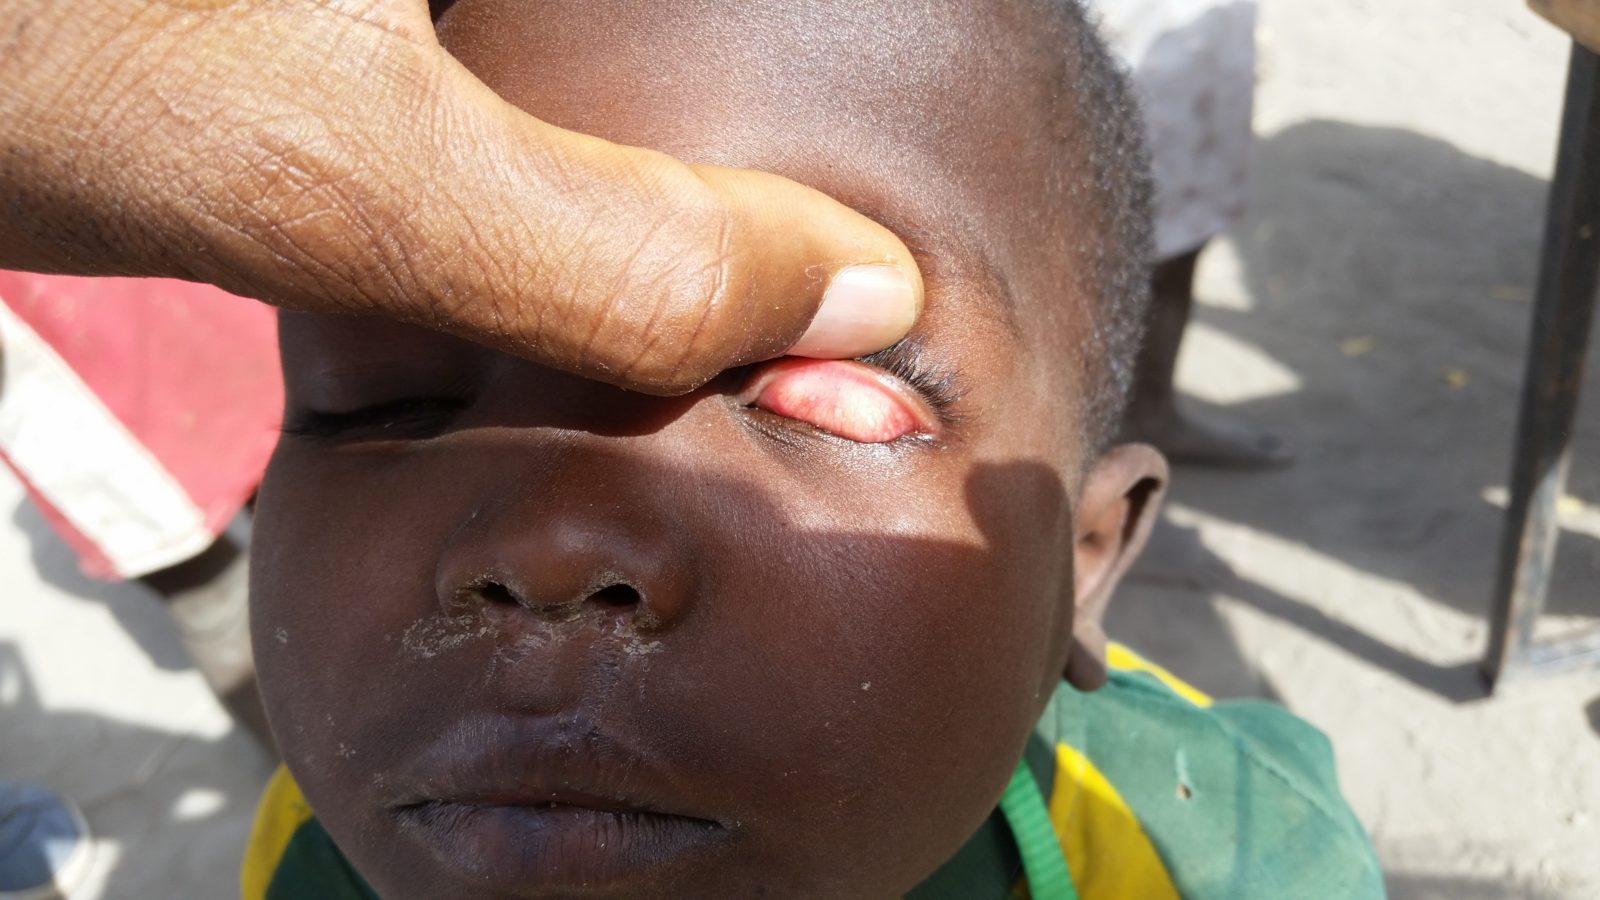 A boy's eyelid is checked for signs of trachoma